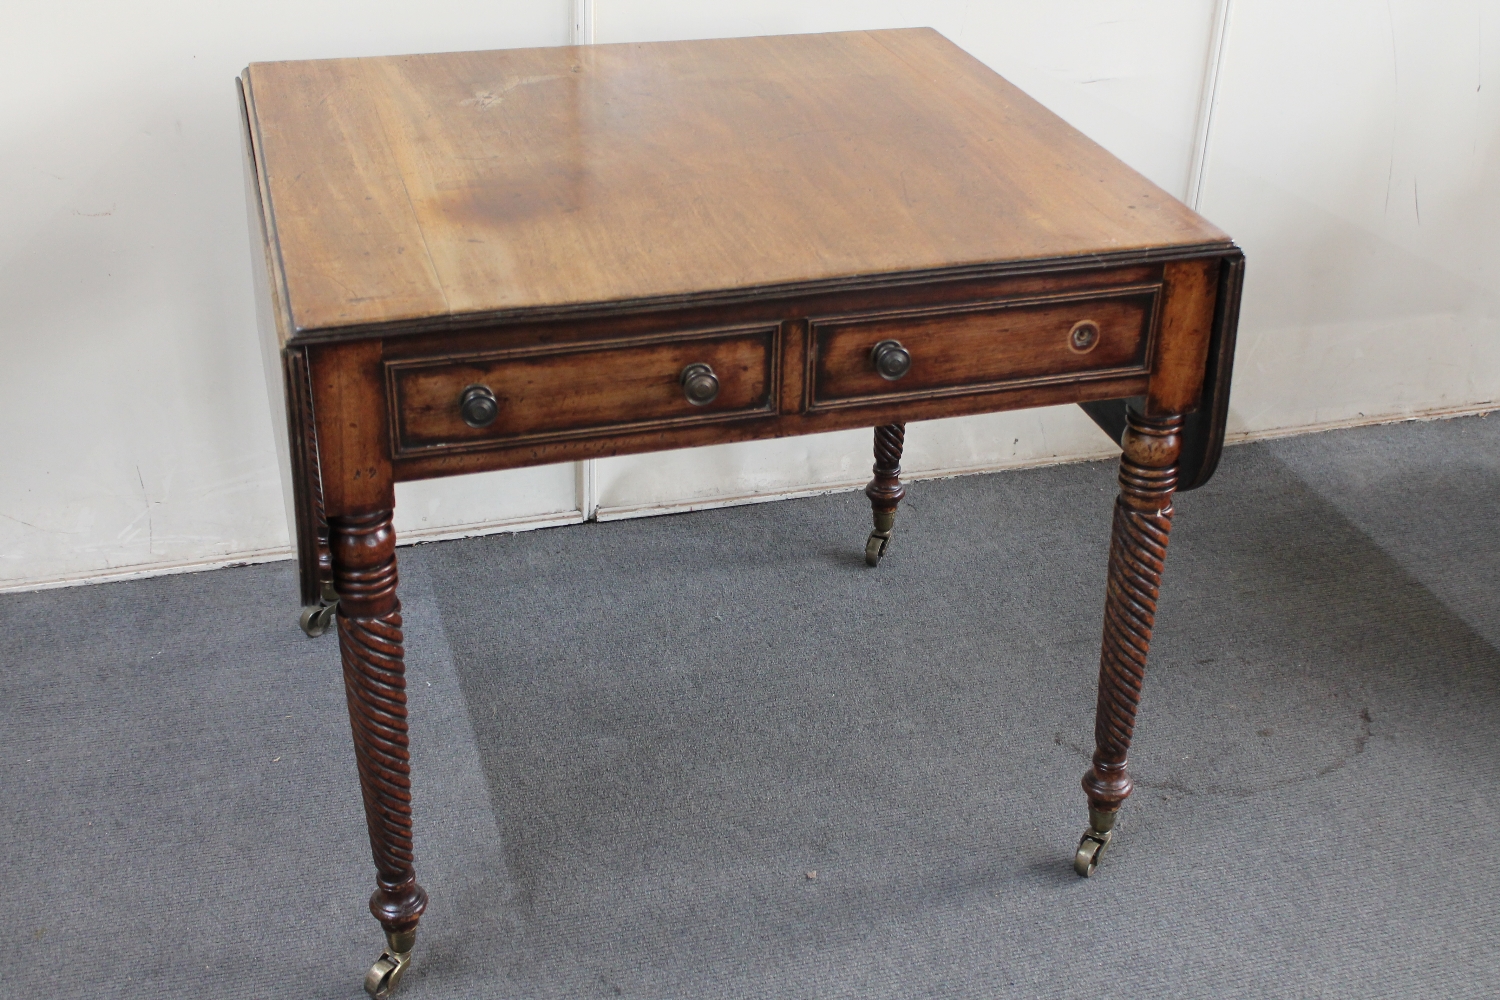 A 19th century mahogany flap sided table on turned legs